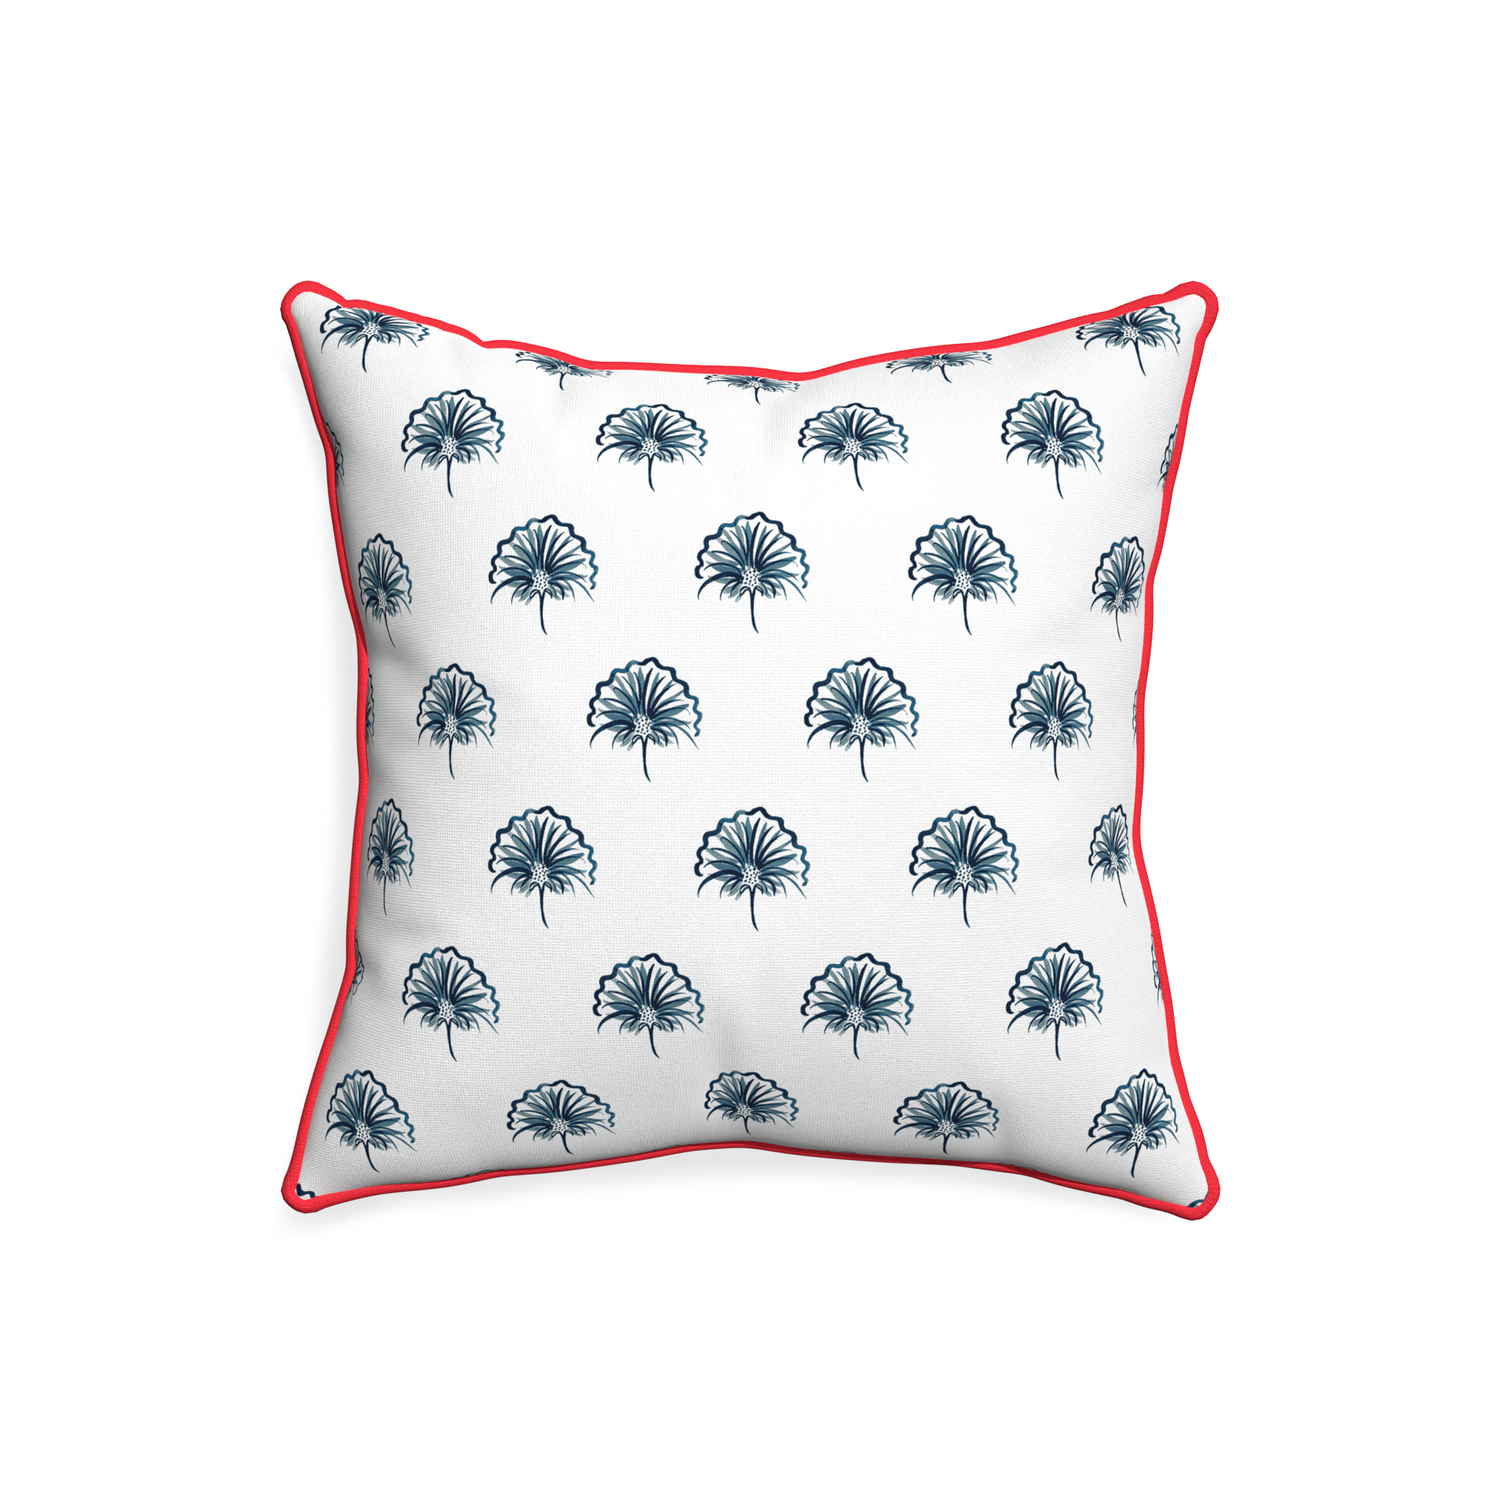 20-square penelope midnight custom floral navypillow with cherry piping on white background